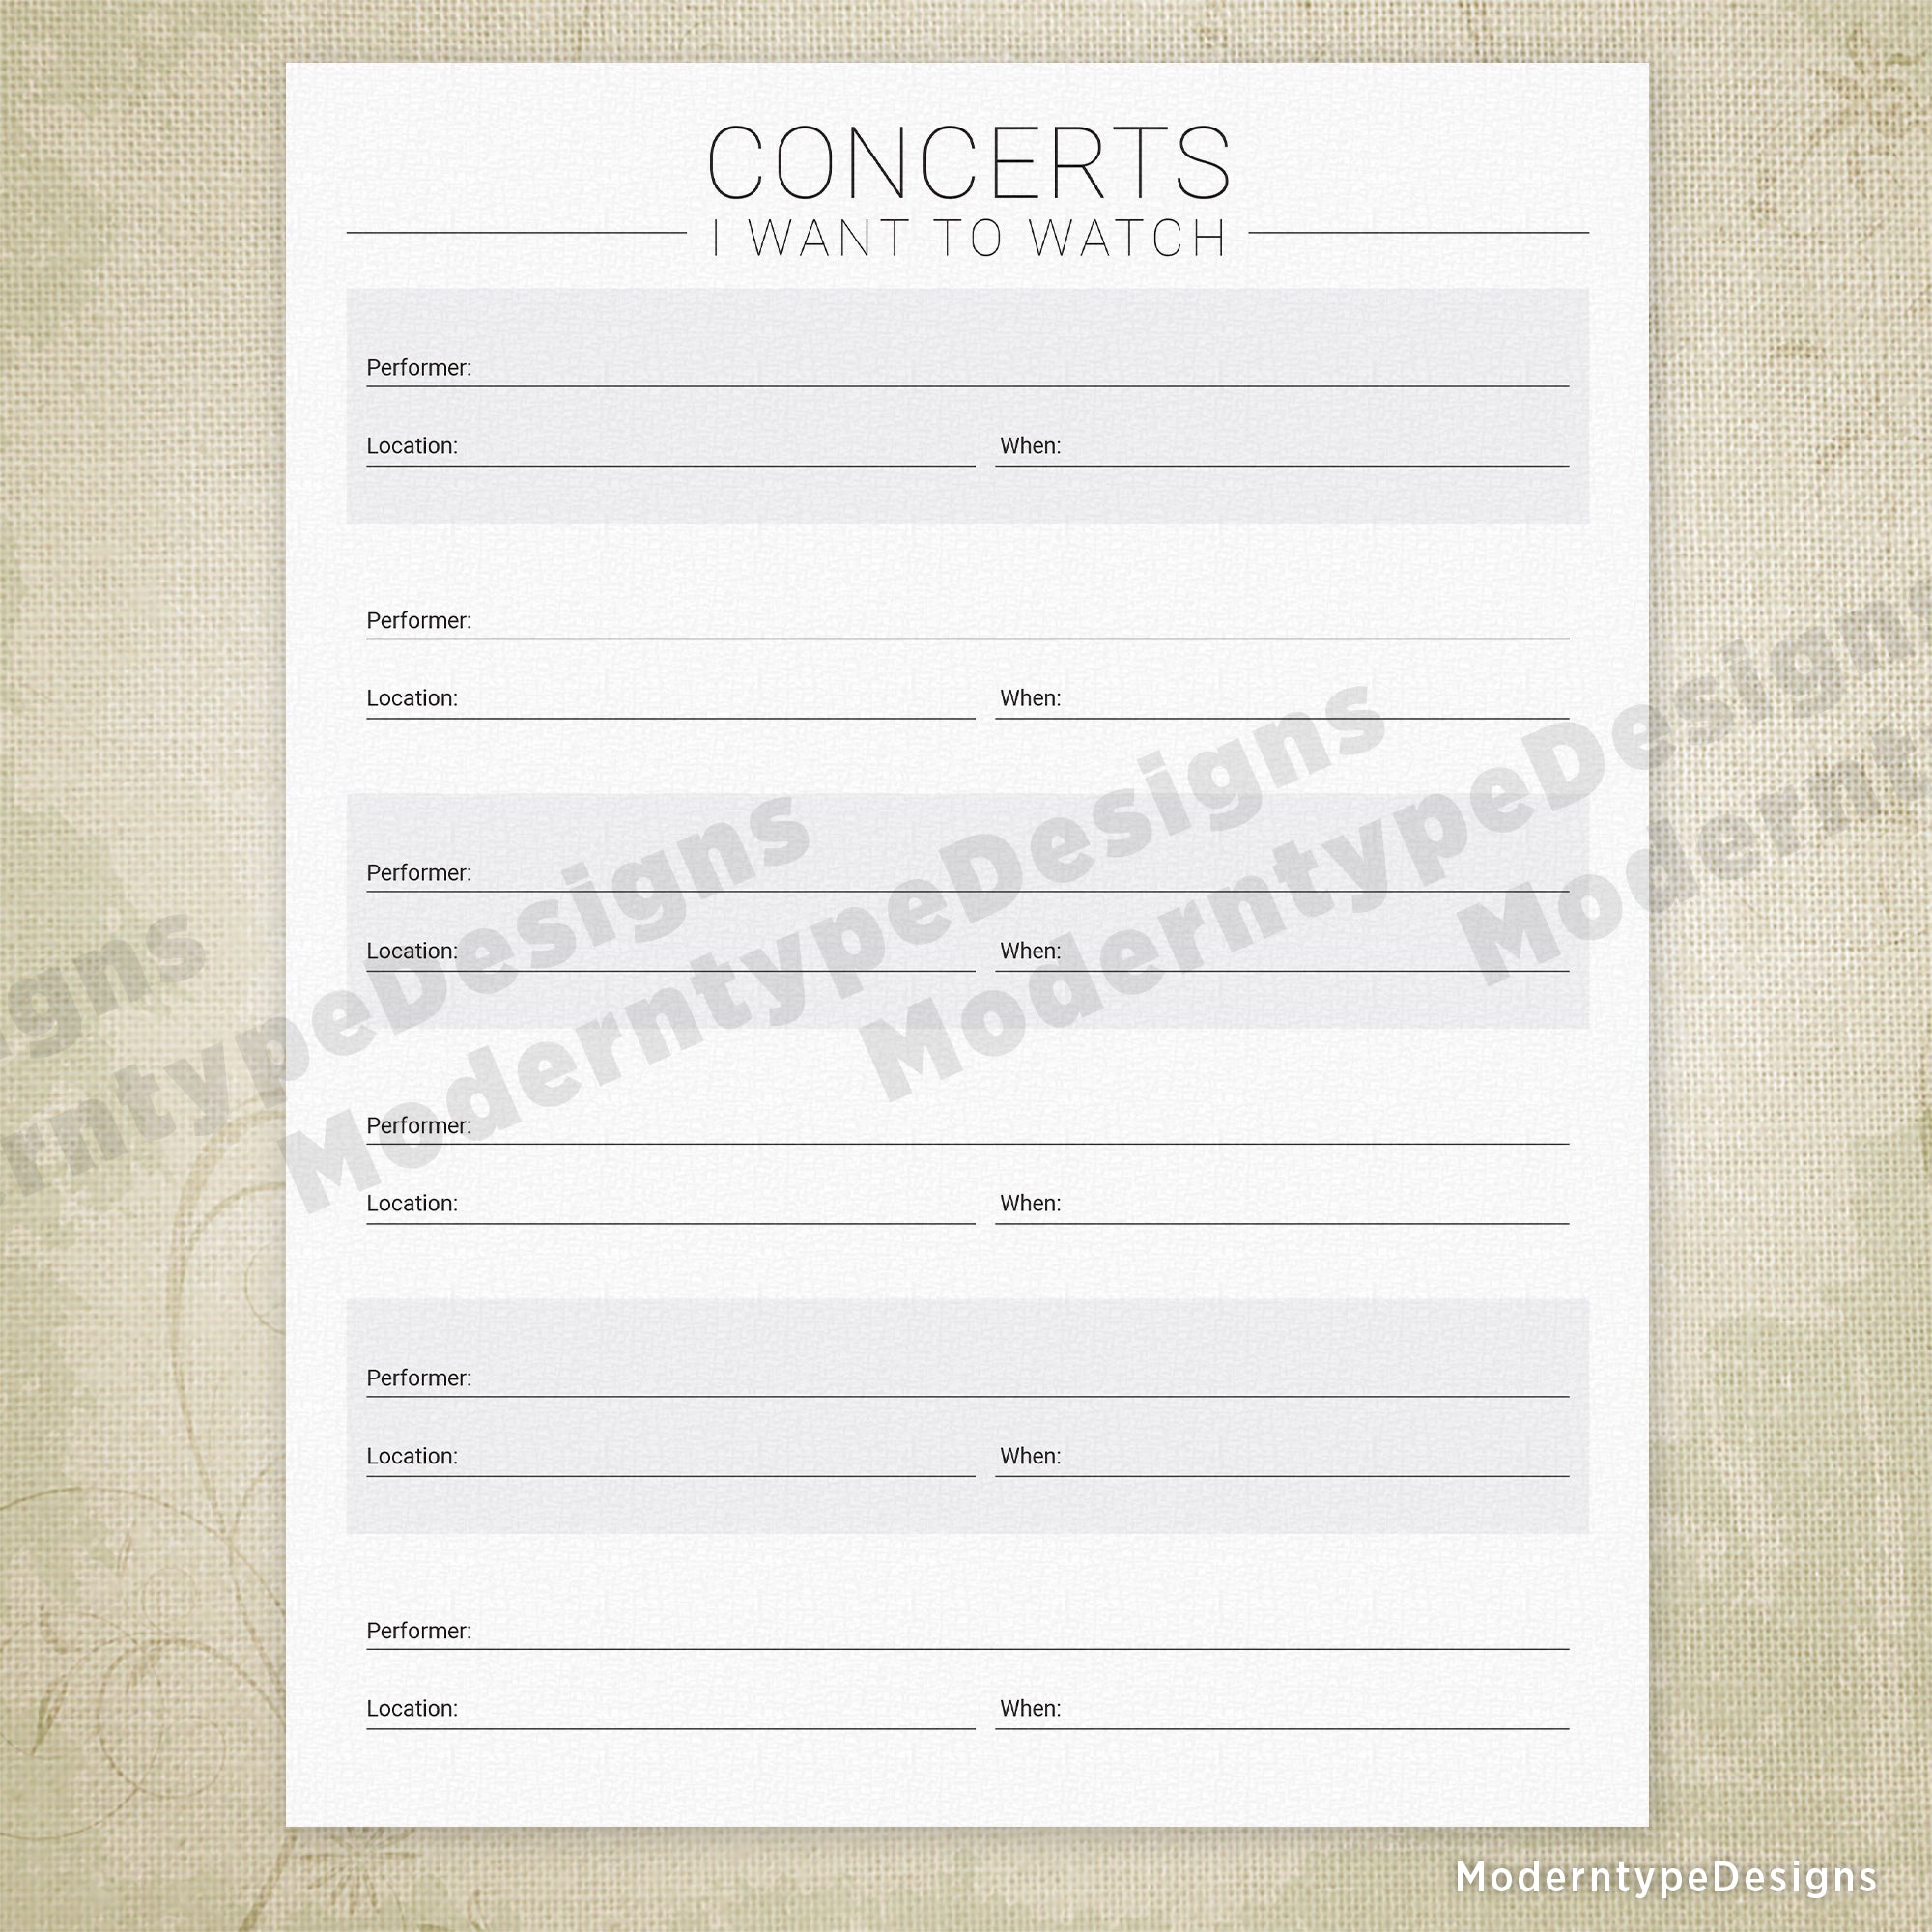 Concerts I've Watched & I Want to Watch Printable